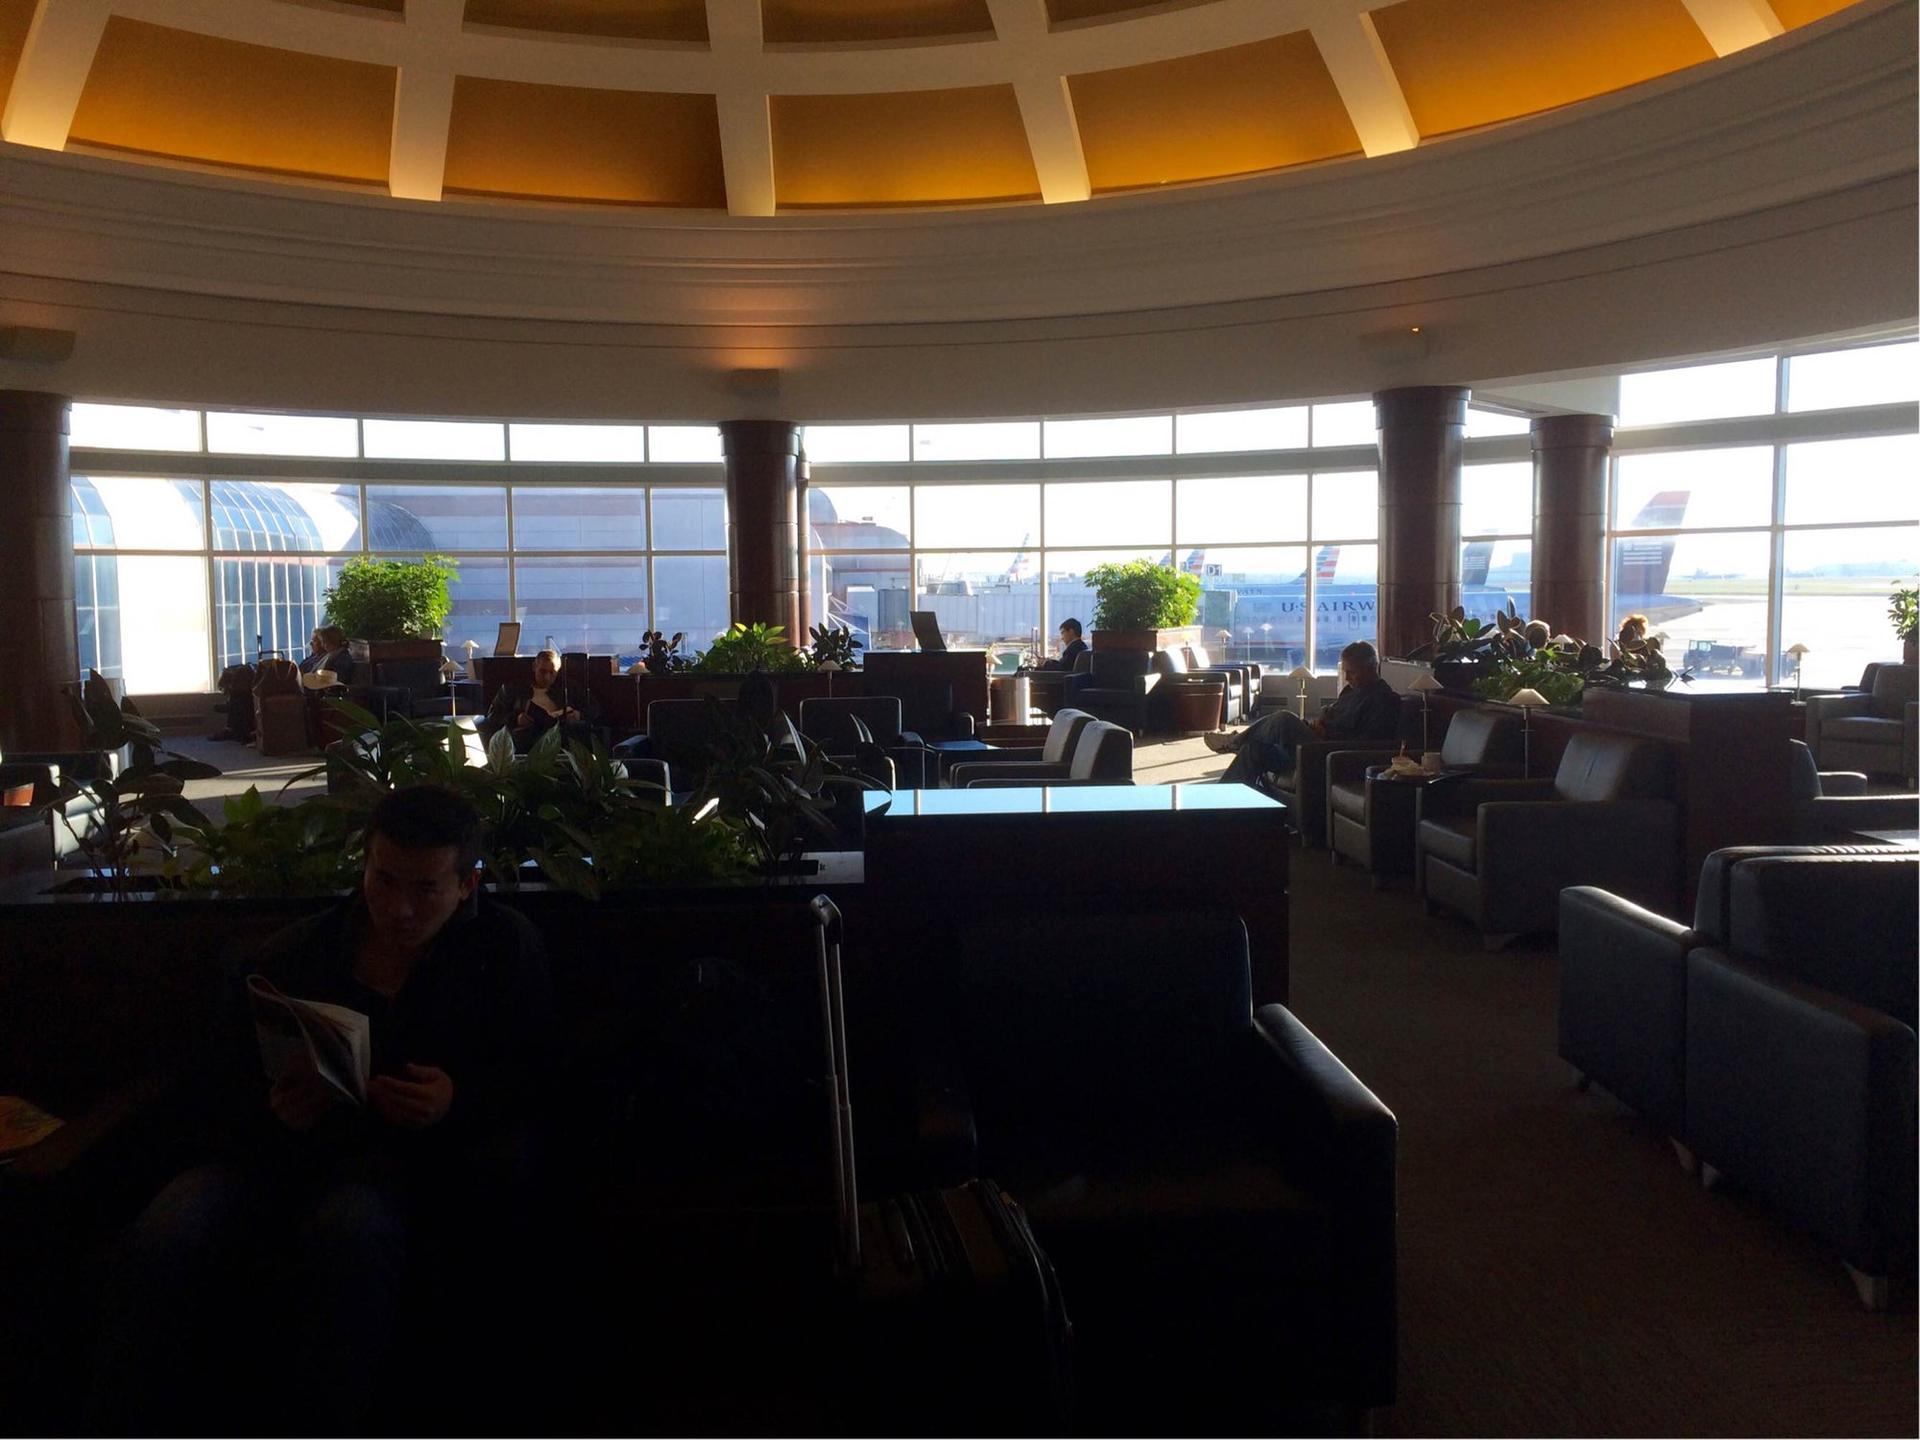 American Airlines Admirals Club image 11 of 37